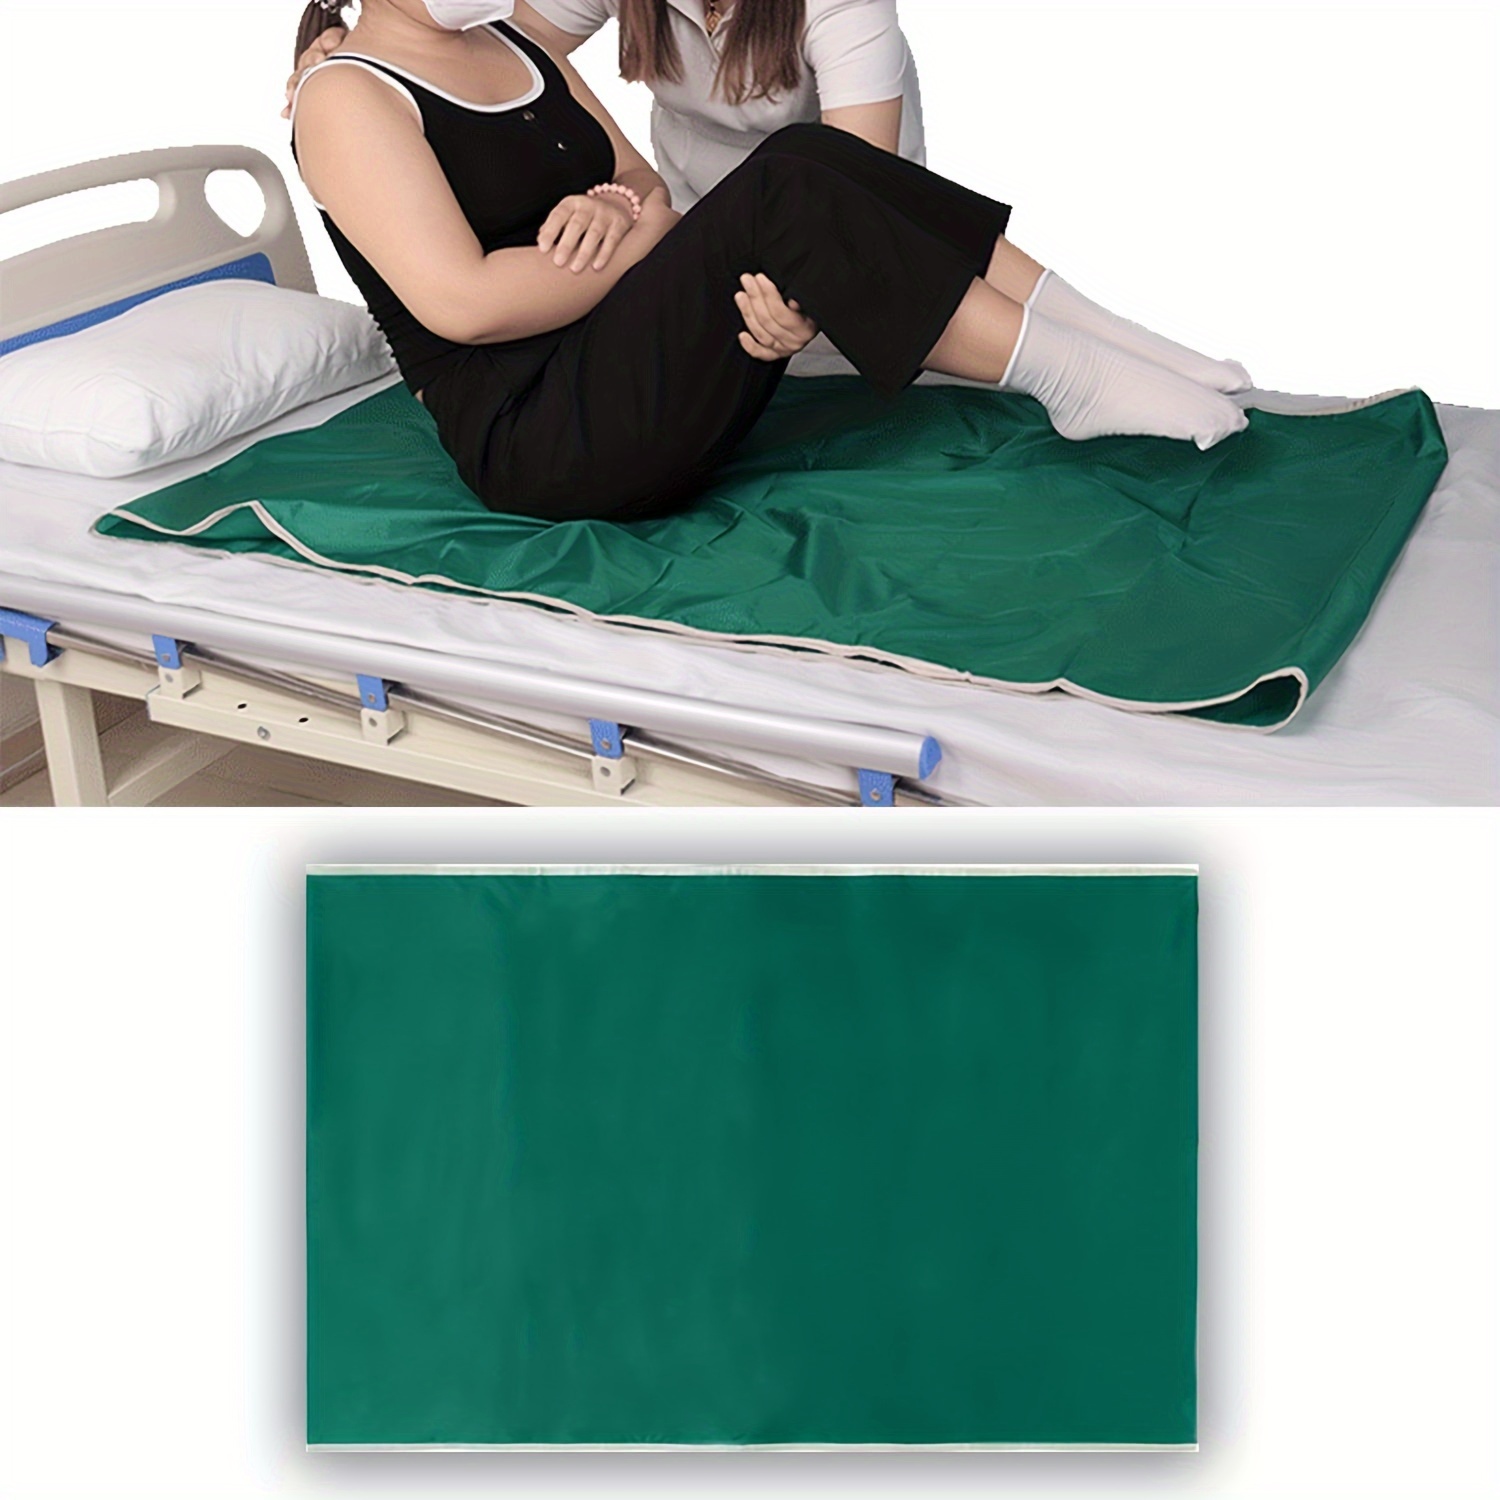 

Tubular Slide Sheets For Moving Patients, Reusable & Washable Sliding Draw Sheets For Elderly, Slide Transfers For Bed, Cars, Wheelchairs Turning, Lifting, Repositioning, Nylon Fabric